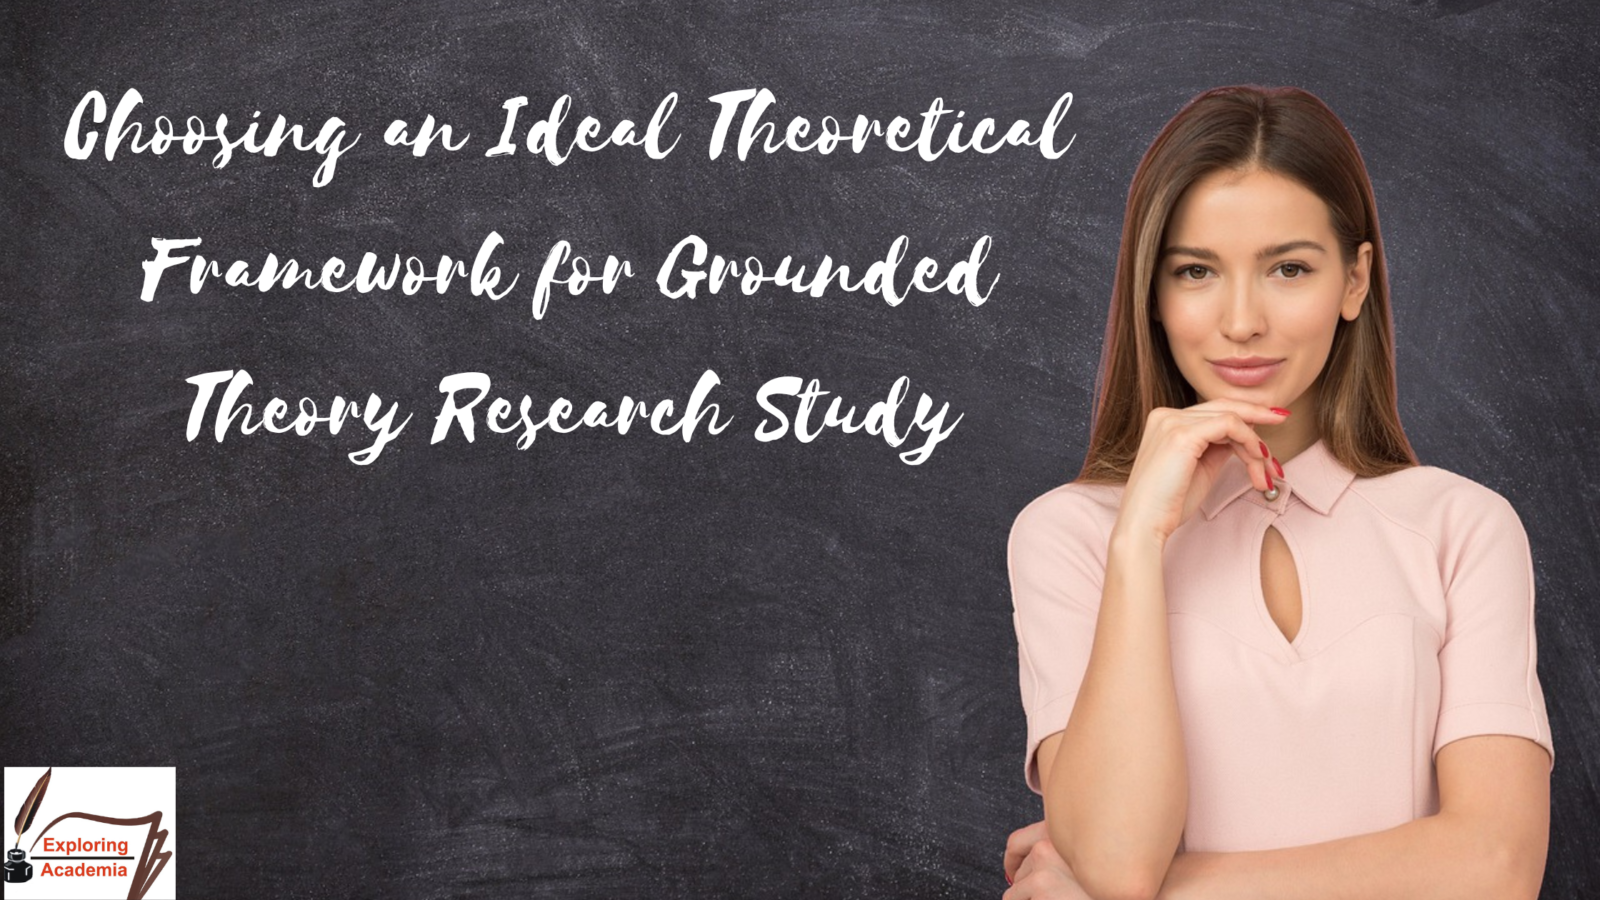 choosing an Ideal Theoretical Framework for Grounded Theory Research Stud